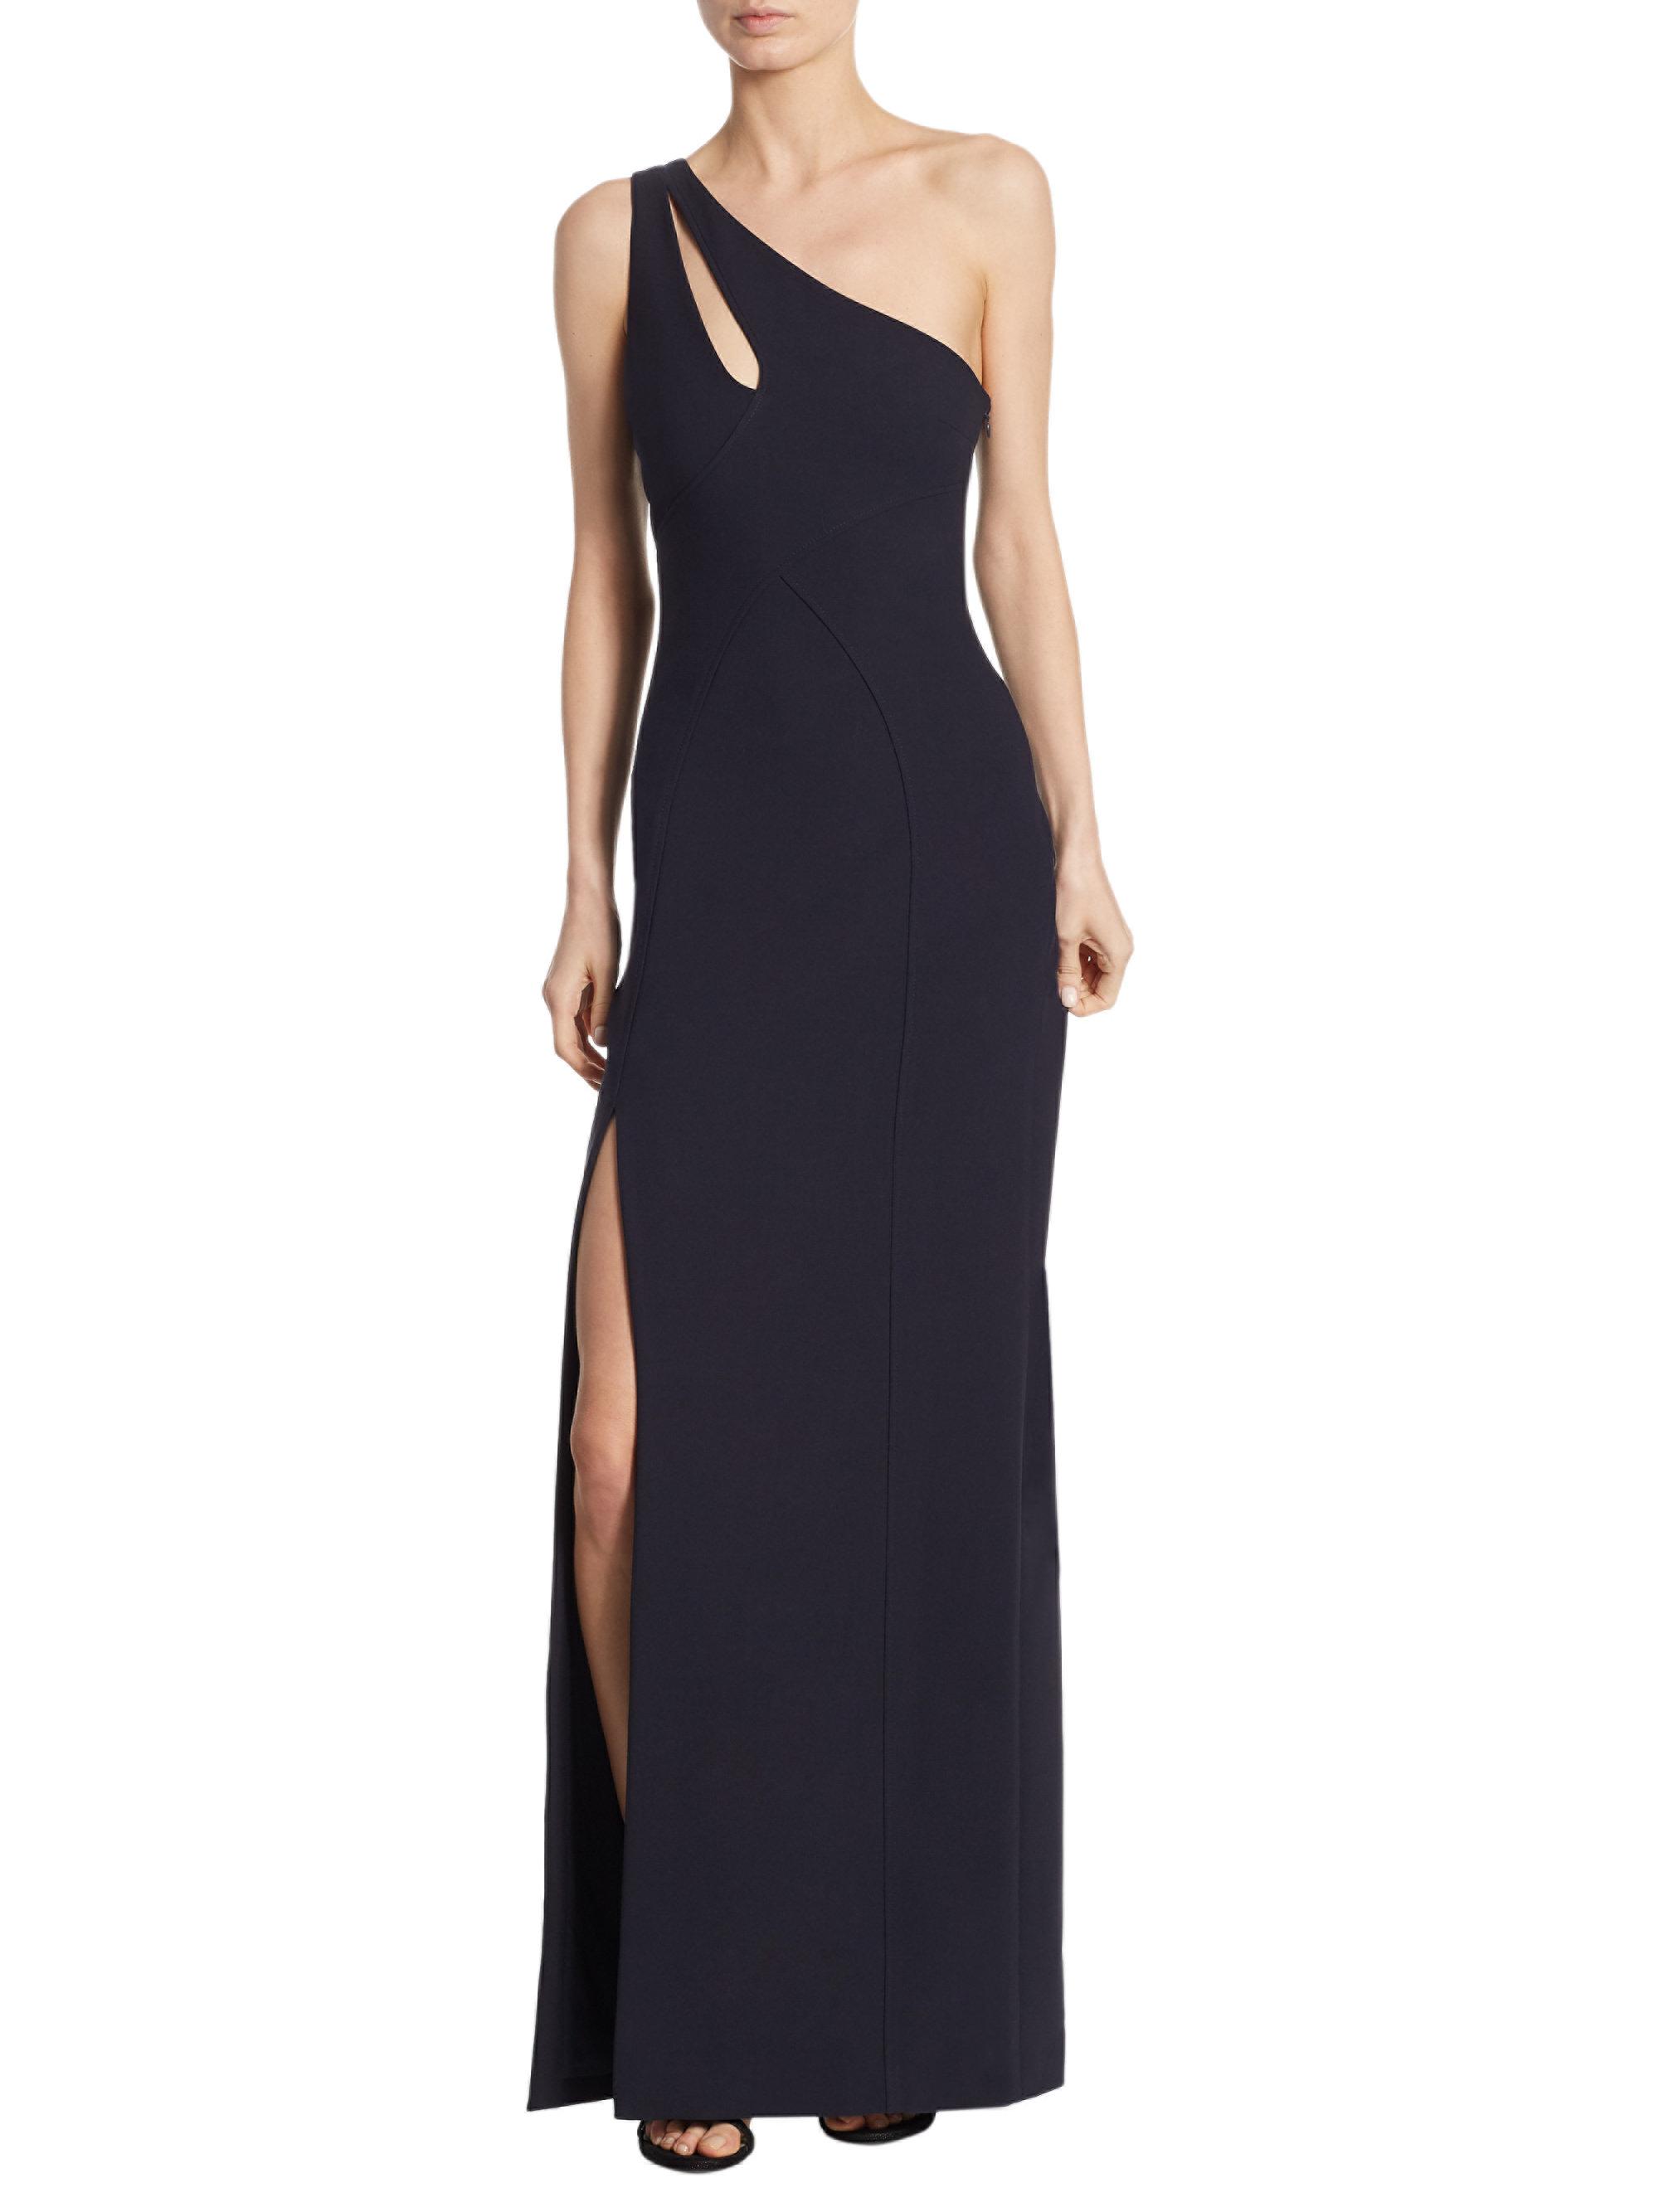 Cinq À Sept Synthetic Gianna Jolie One-shoulder Gown in Navy (Blue) - Lyst